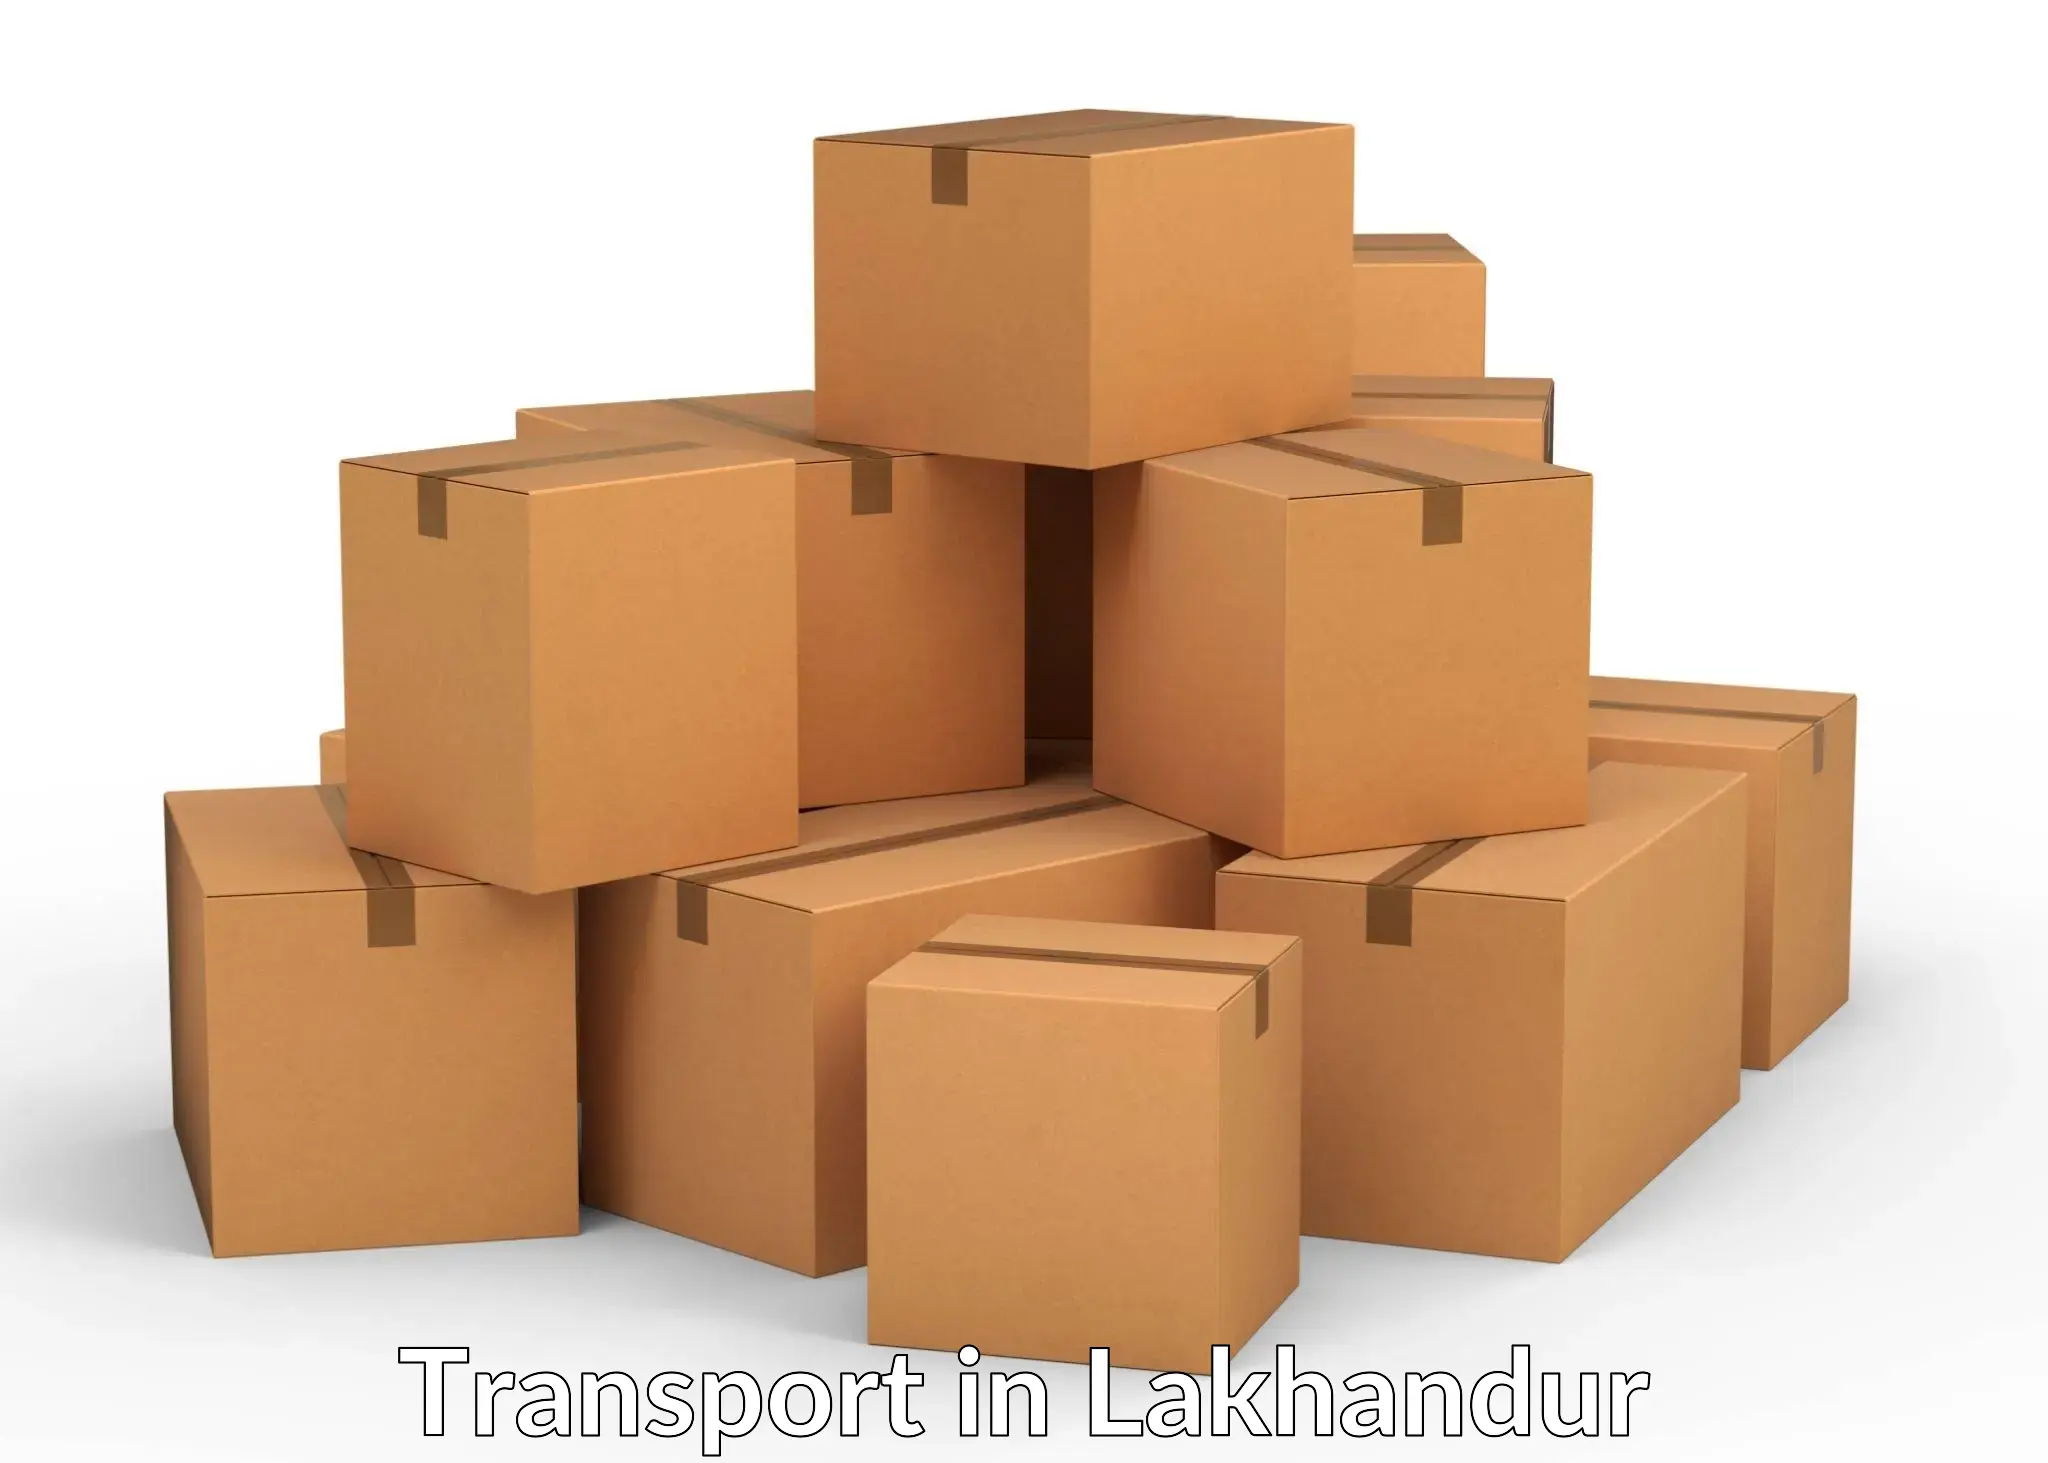 Cargo train transport services in Lakhandur